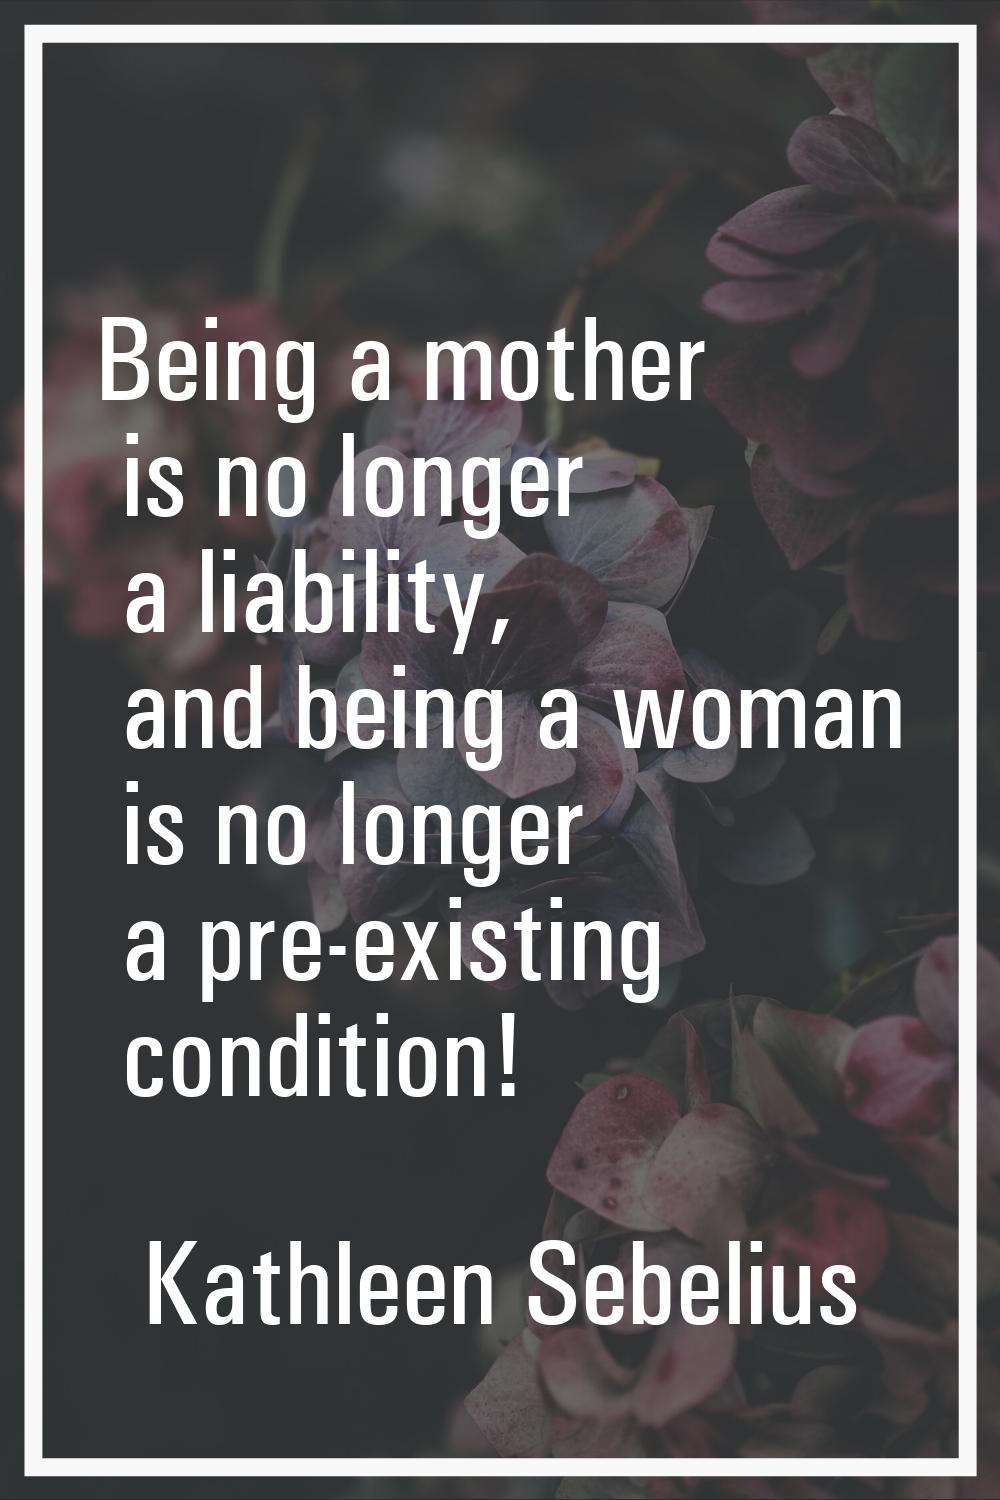 Being a mother is no longer a liability, and being a woman is no longer a pre-existing condition!